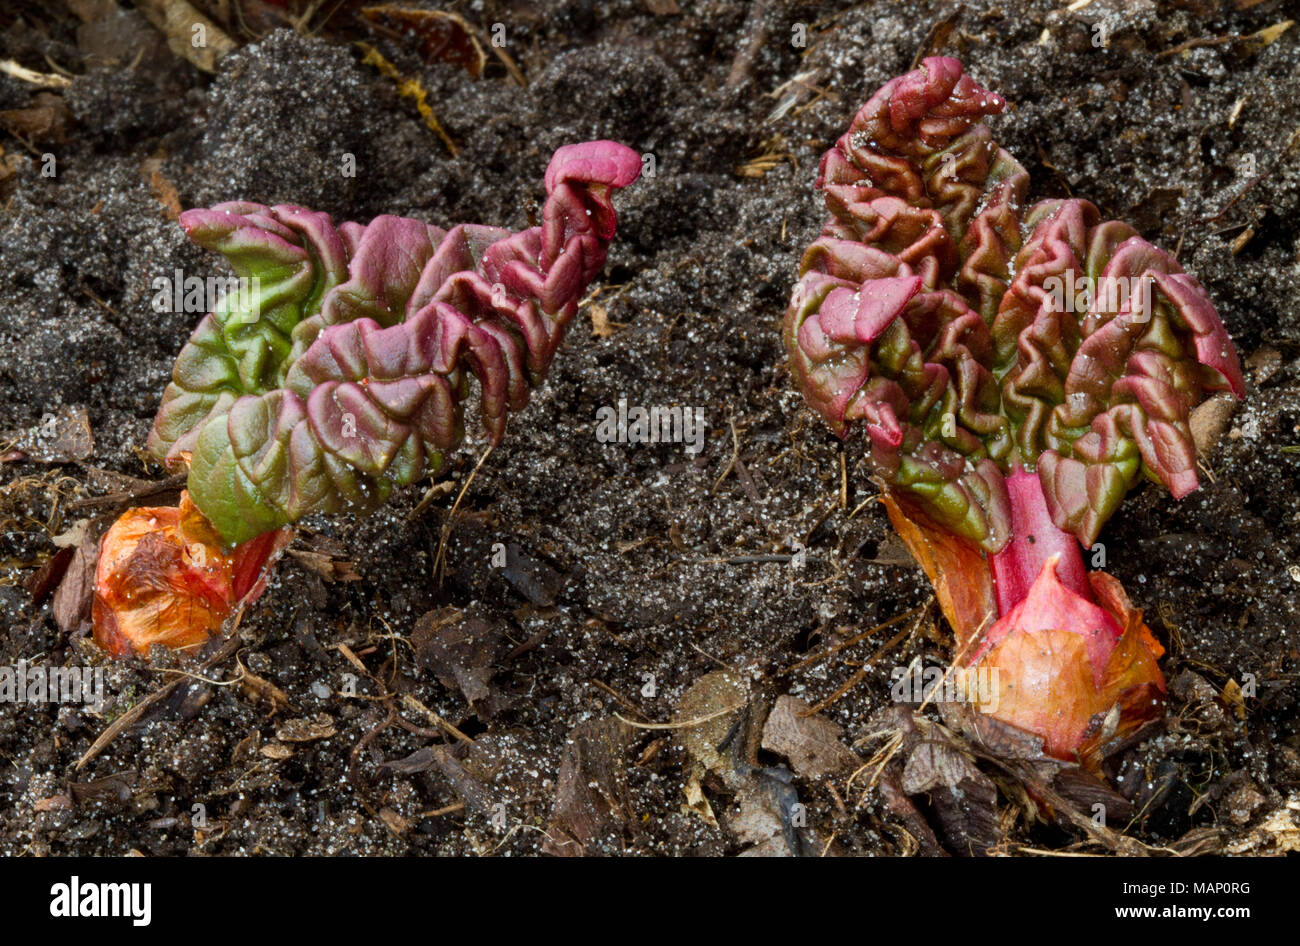 Two Rhubarb plants emerging from the soil early in spring Stock Photo